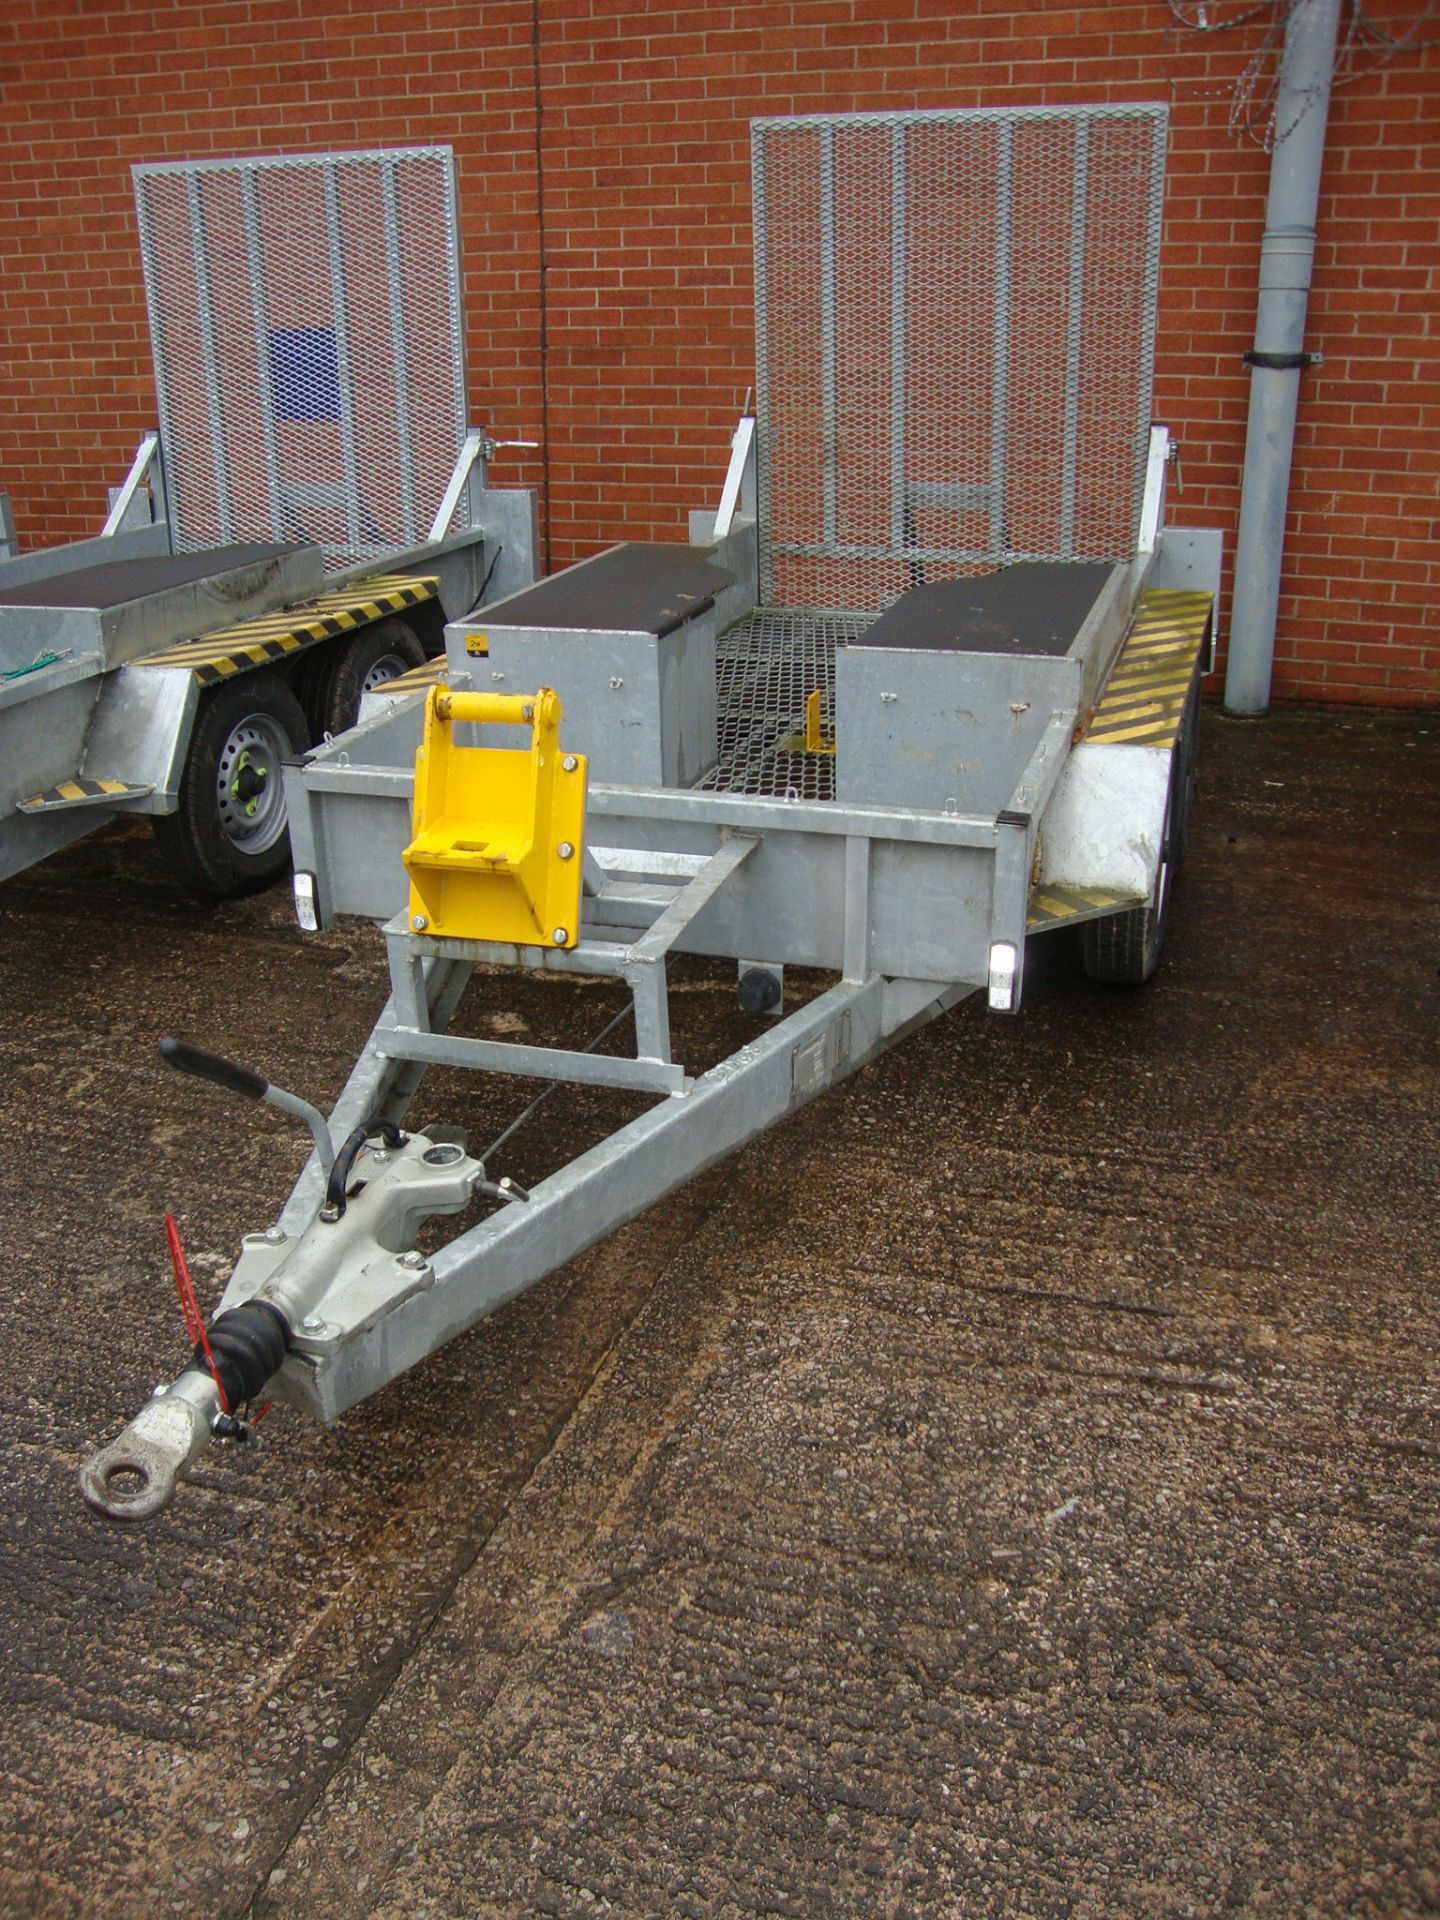 Mini digger/excavator specialist trailer incorporating large drive-on ramp at rear, shrouds for